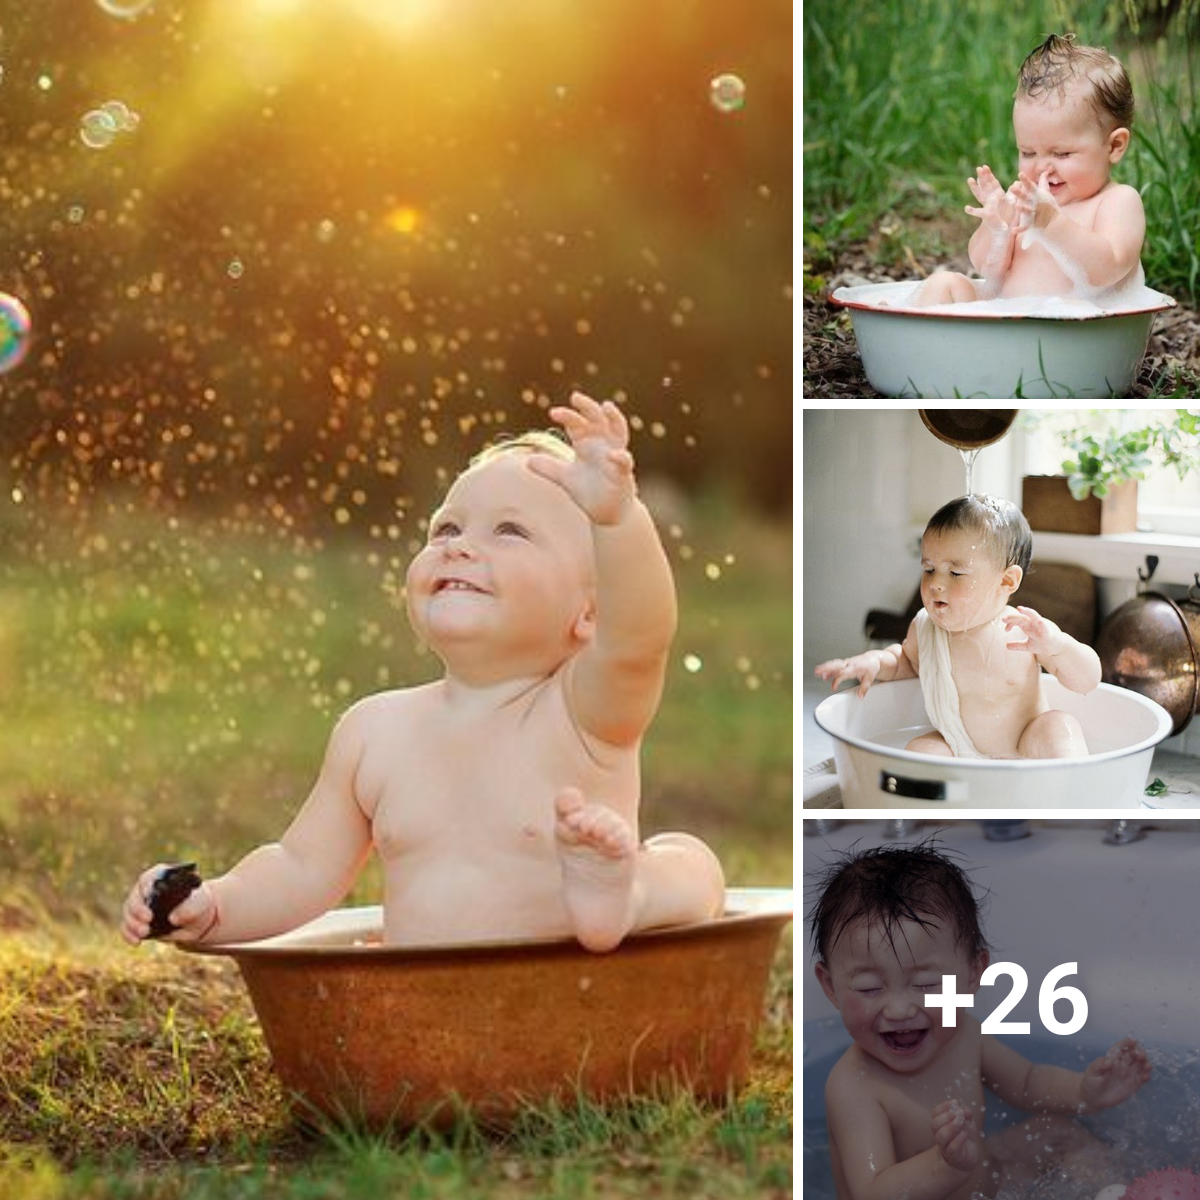 Check out these fun and adorable pictures of babies having fun in bathrooms filled with water.